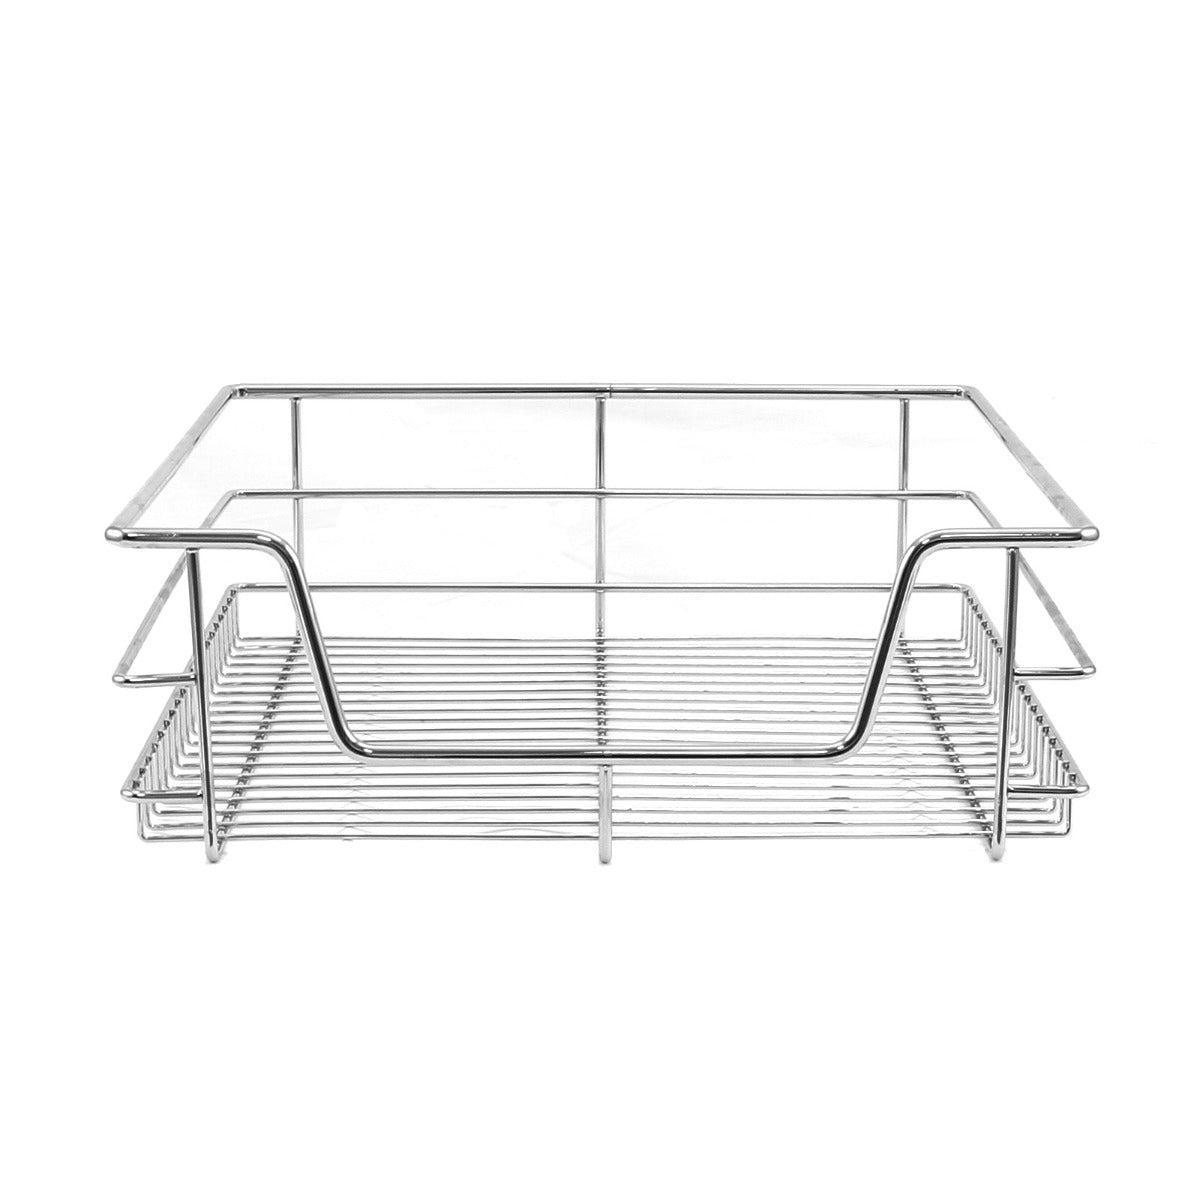 2 x KuKoo Kitchen Pull Out Storage Baskets – 500mm Wide Cabinet - Used - Very Good